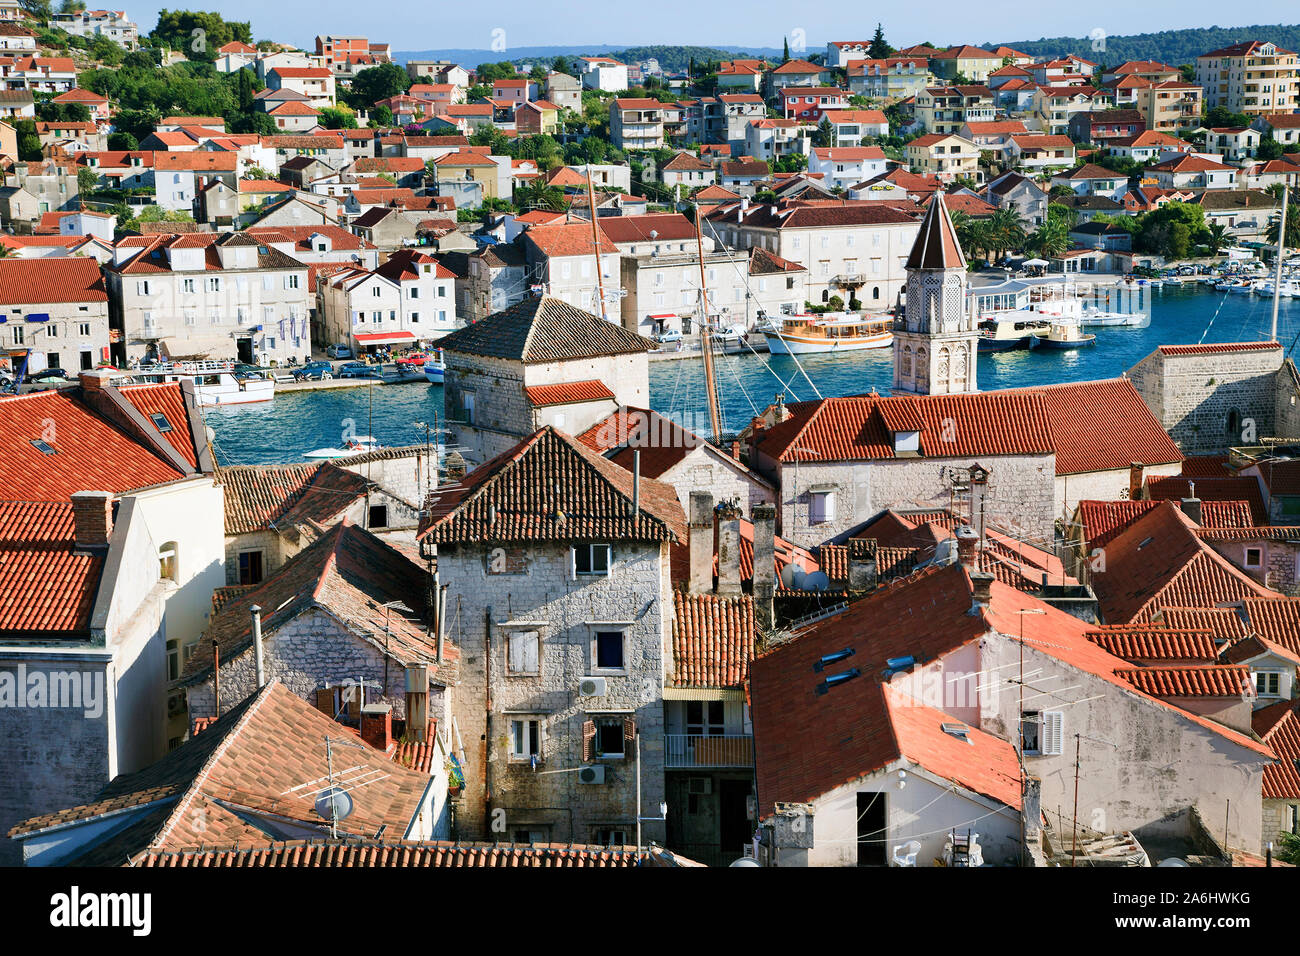 Panoramic view of the downtown and port of Trogir town, Croatia Stock Photo